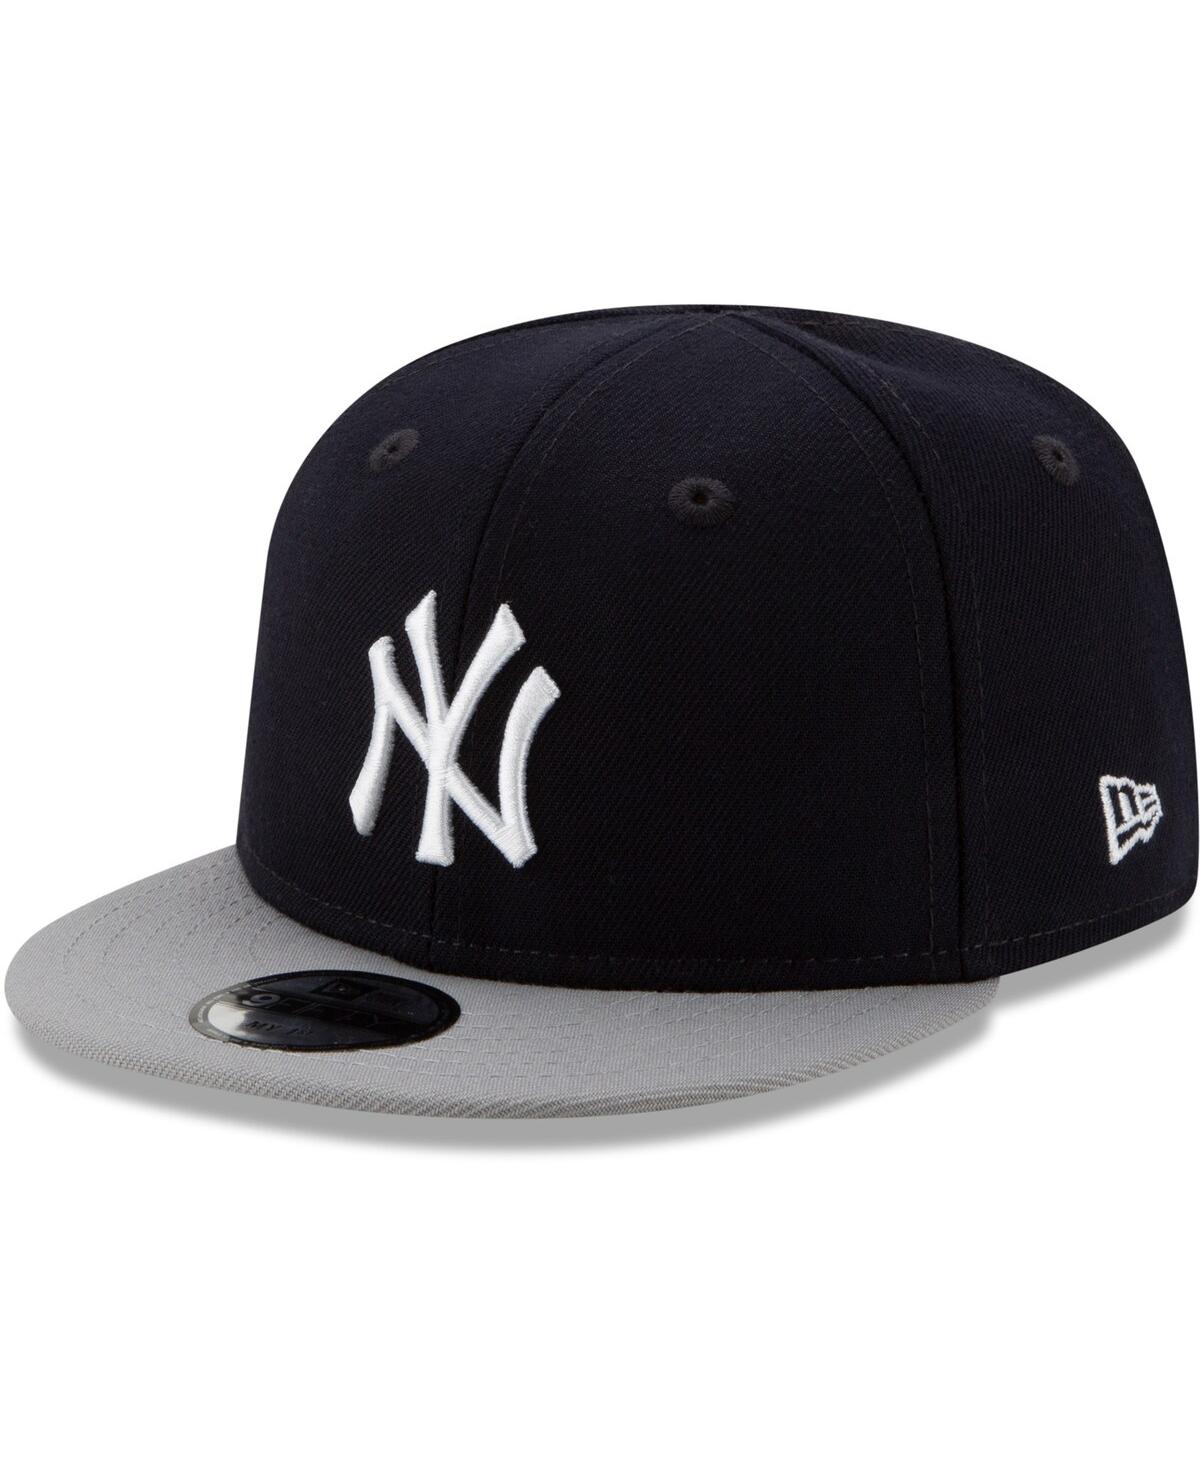 New Era Babies' Infant Unisex  Navy New York Yankees My First 9fifty Hat